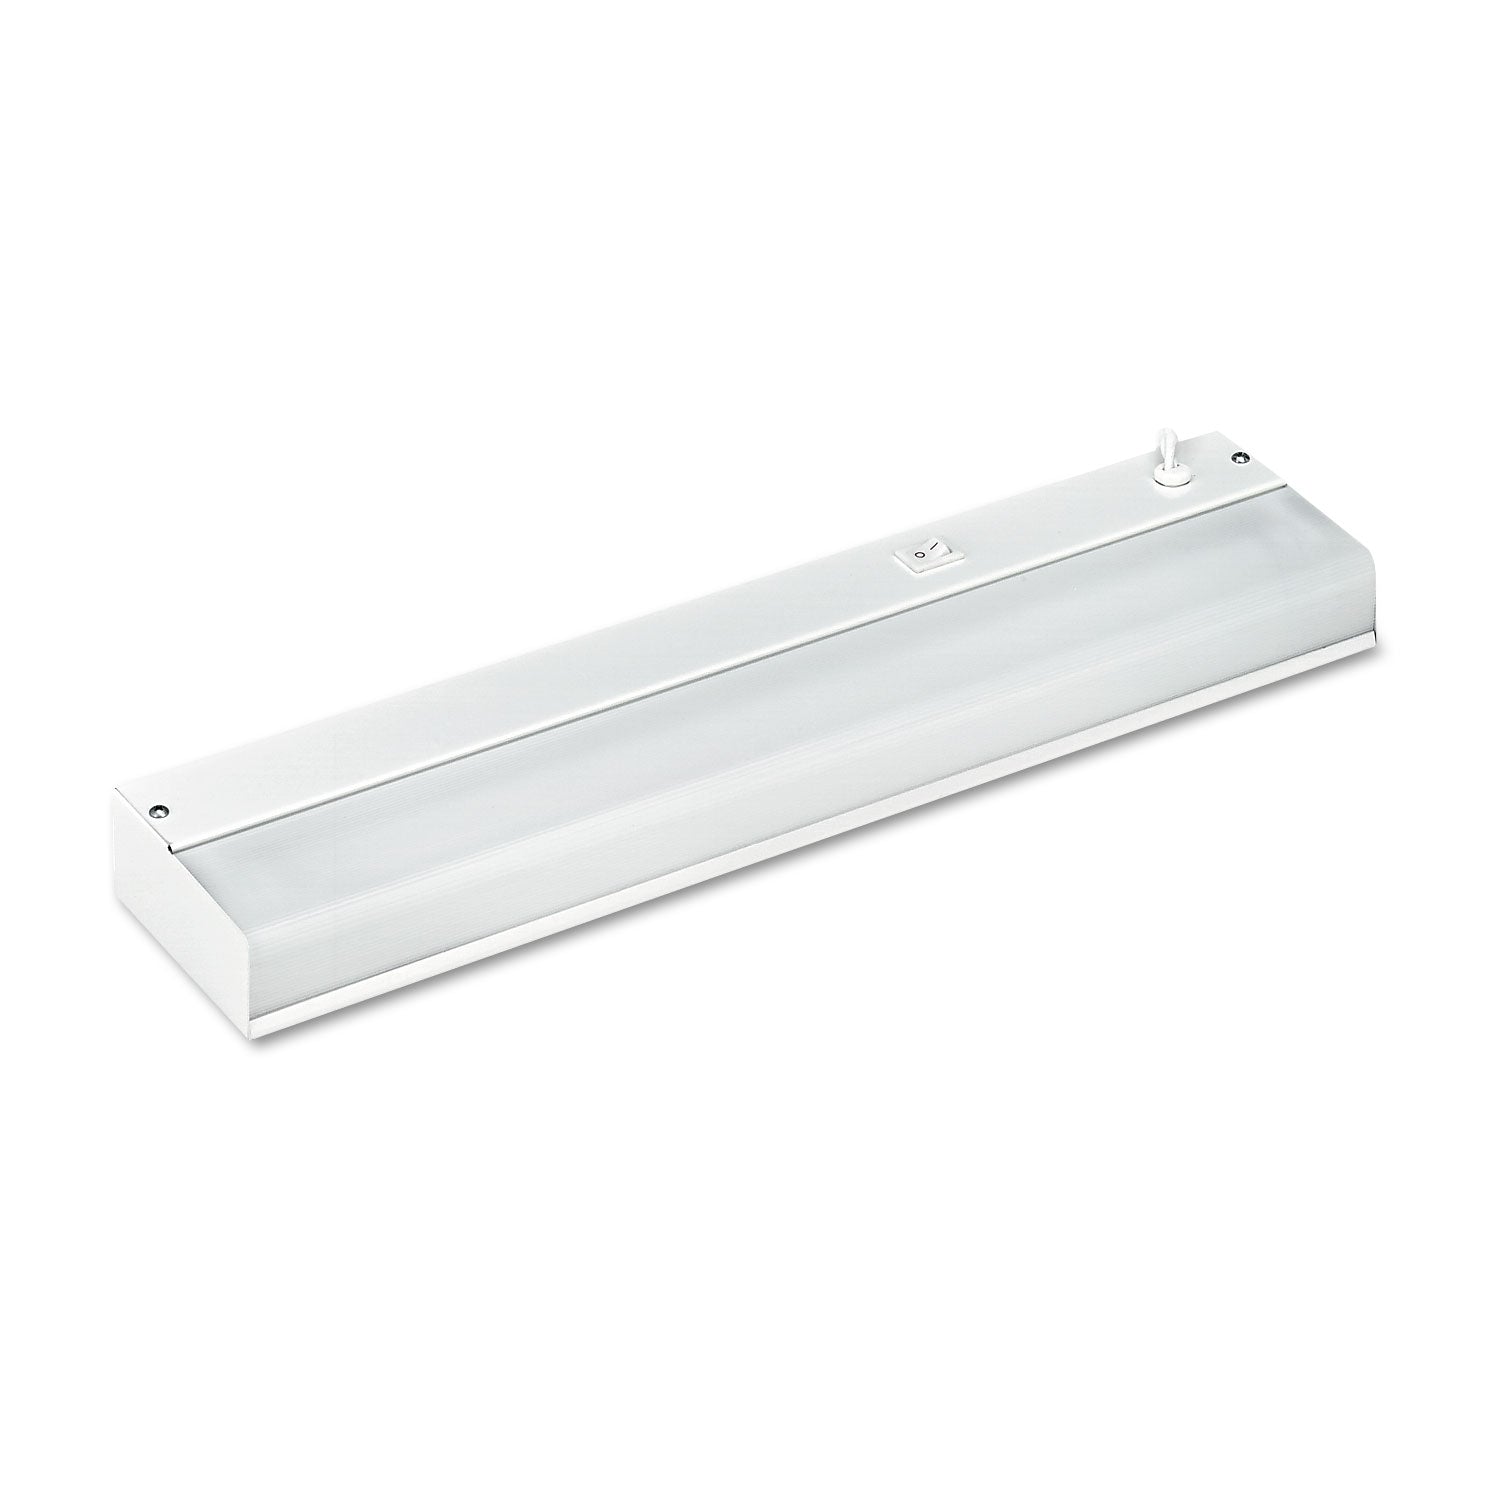 Low-Profile Under-Cabinet LED-Tube Light Fixture with (1) 9 W LED Tube, Steel Housing, 18.25" x 4" x 1.75", White - 